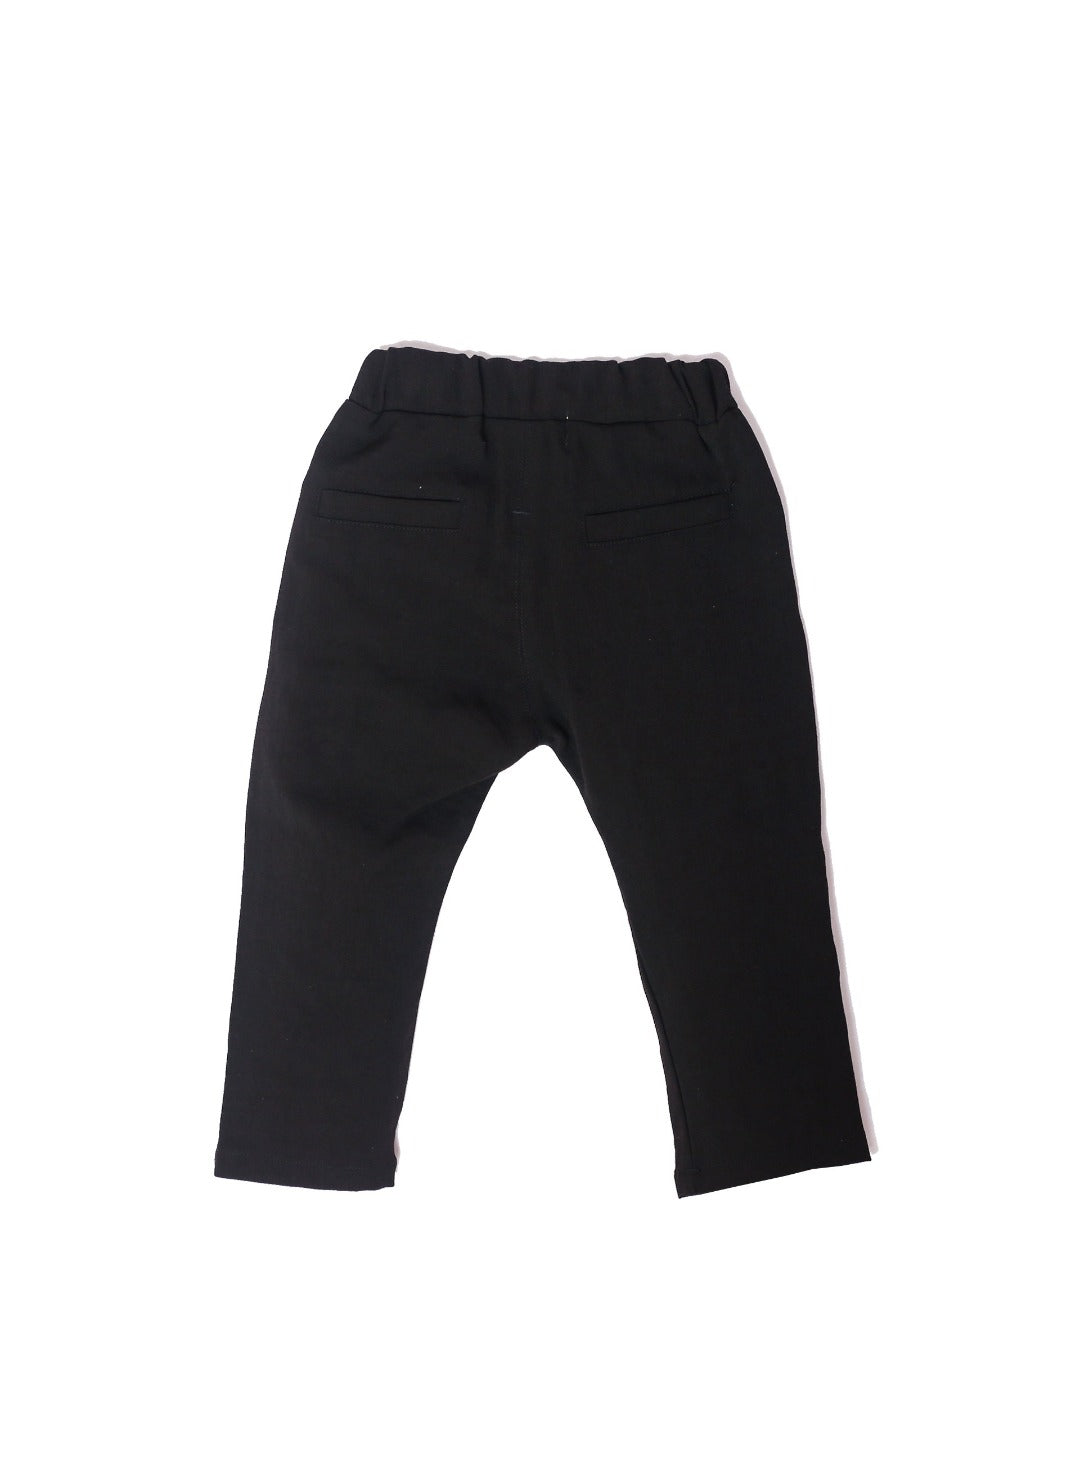 relax cut black pants with three buttons